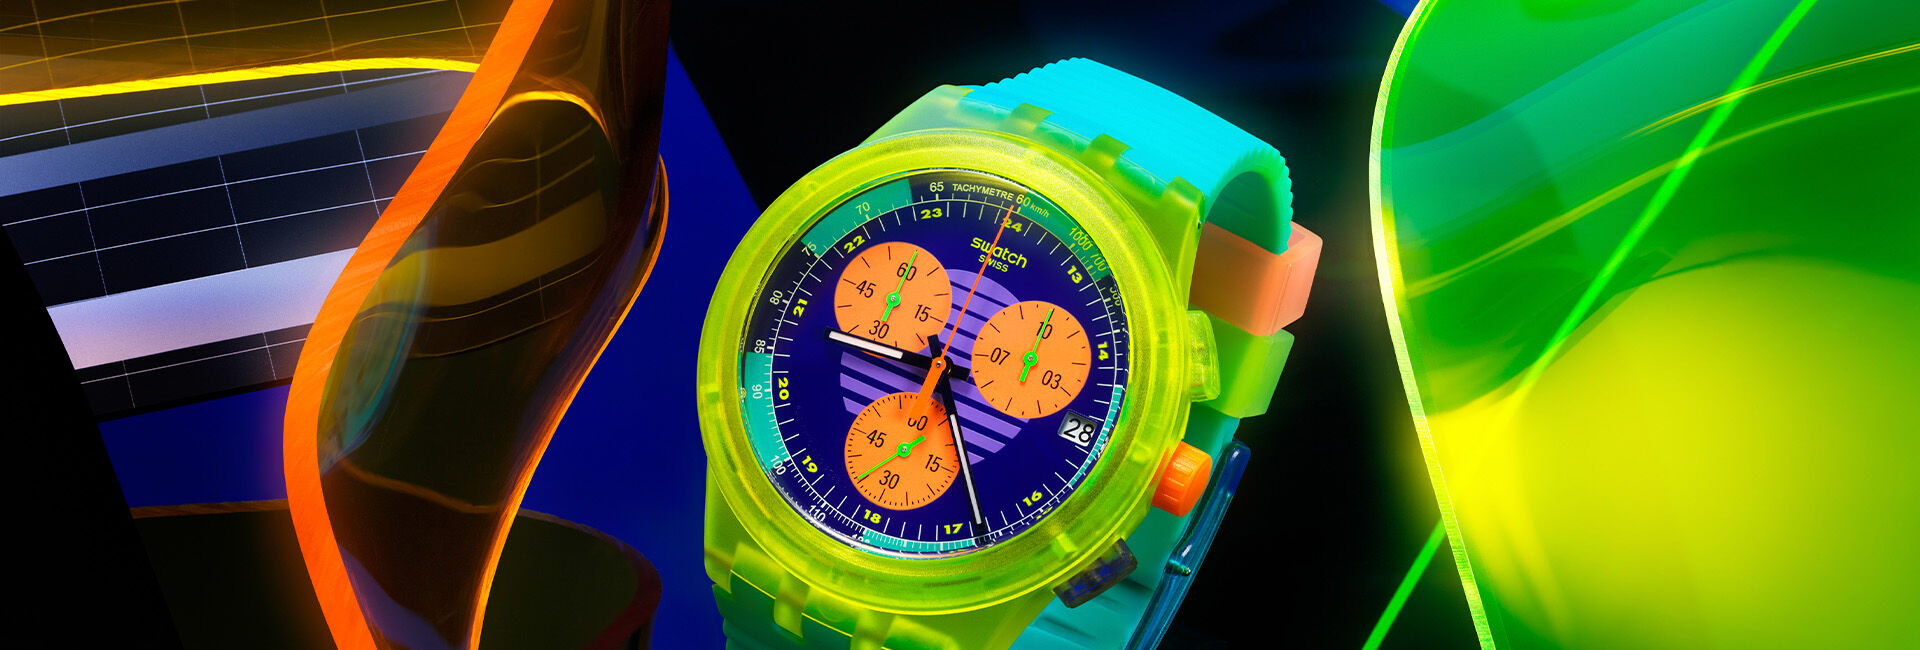 Neon watches from Swatch